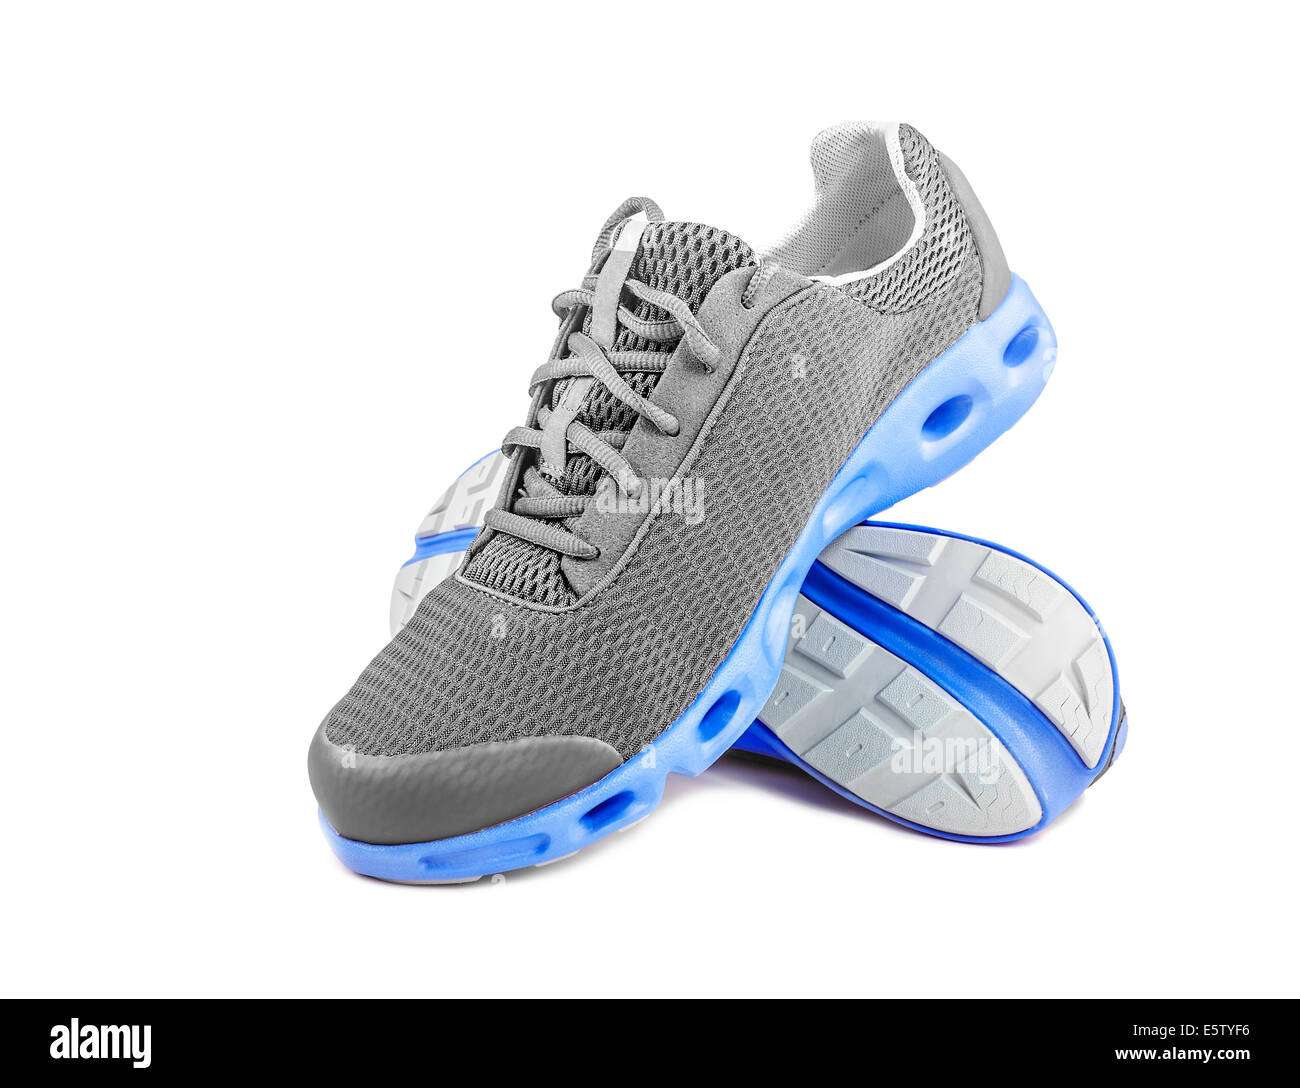 New unbranded running shoes, sneakers or trainers on white Stock Photo